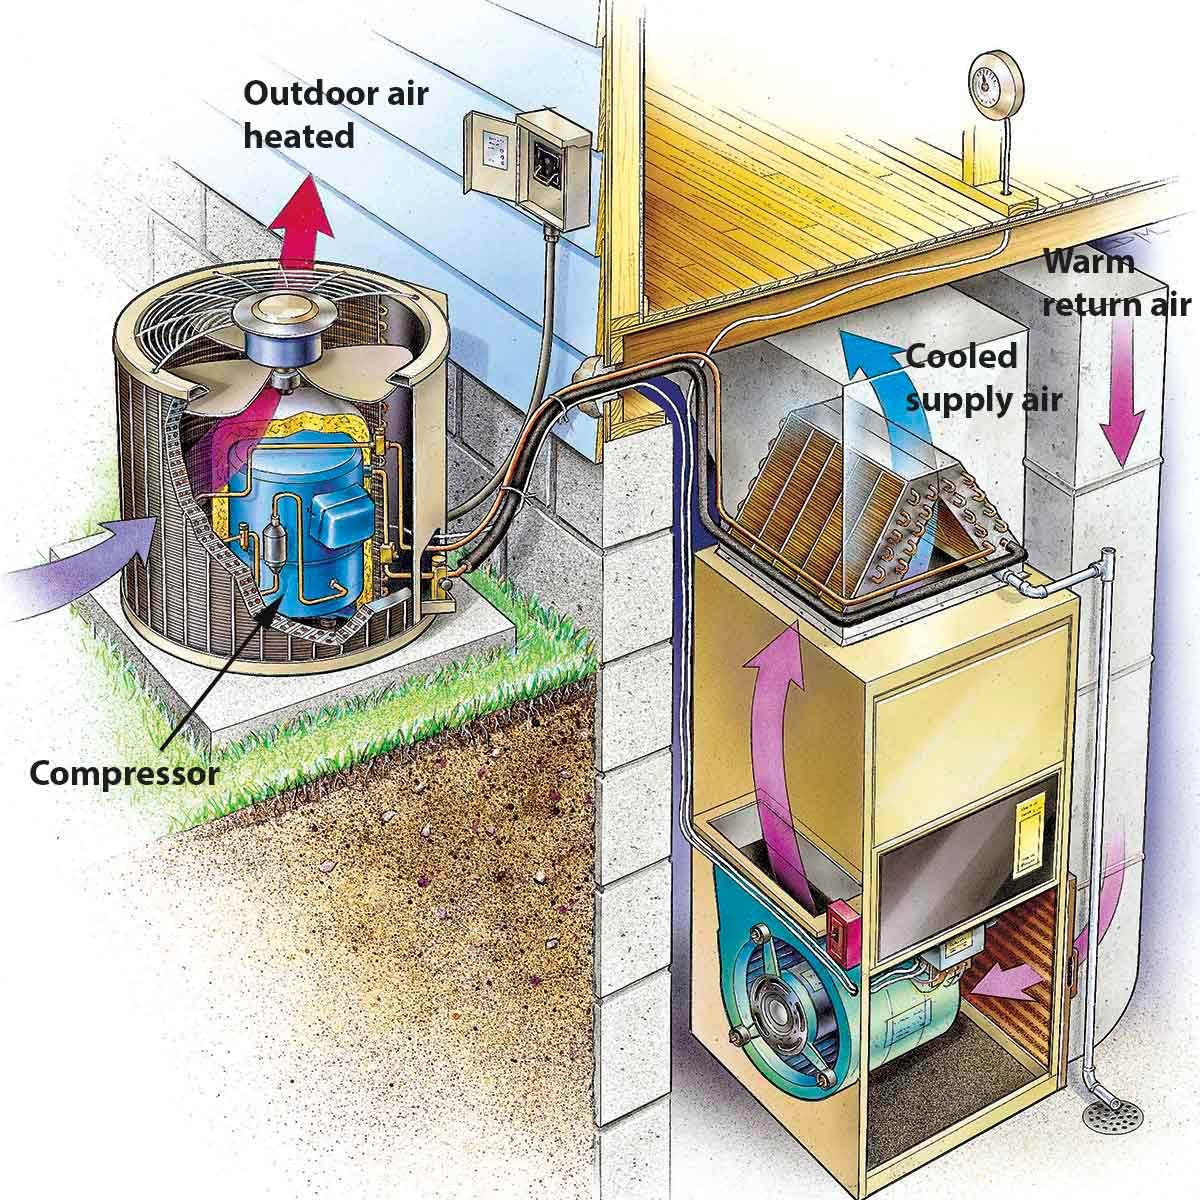 How Air Conditioners Work Diagram